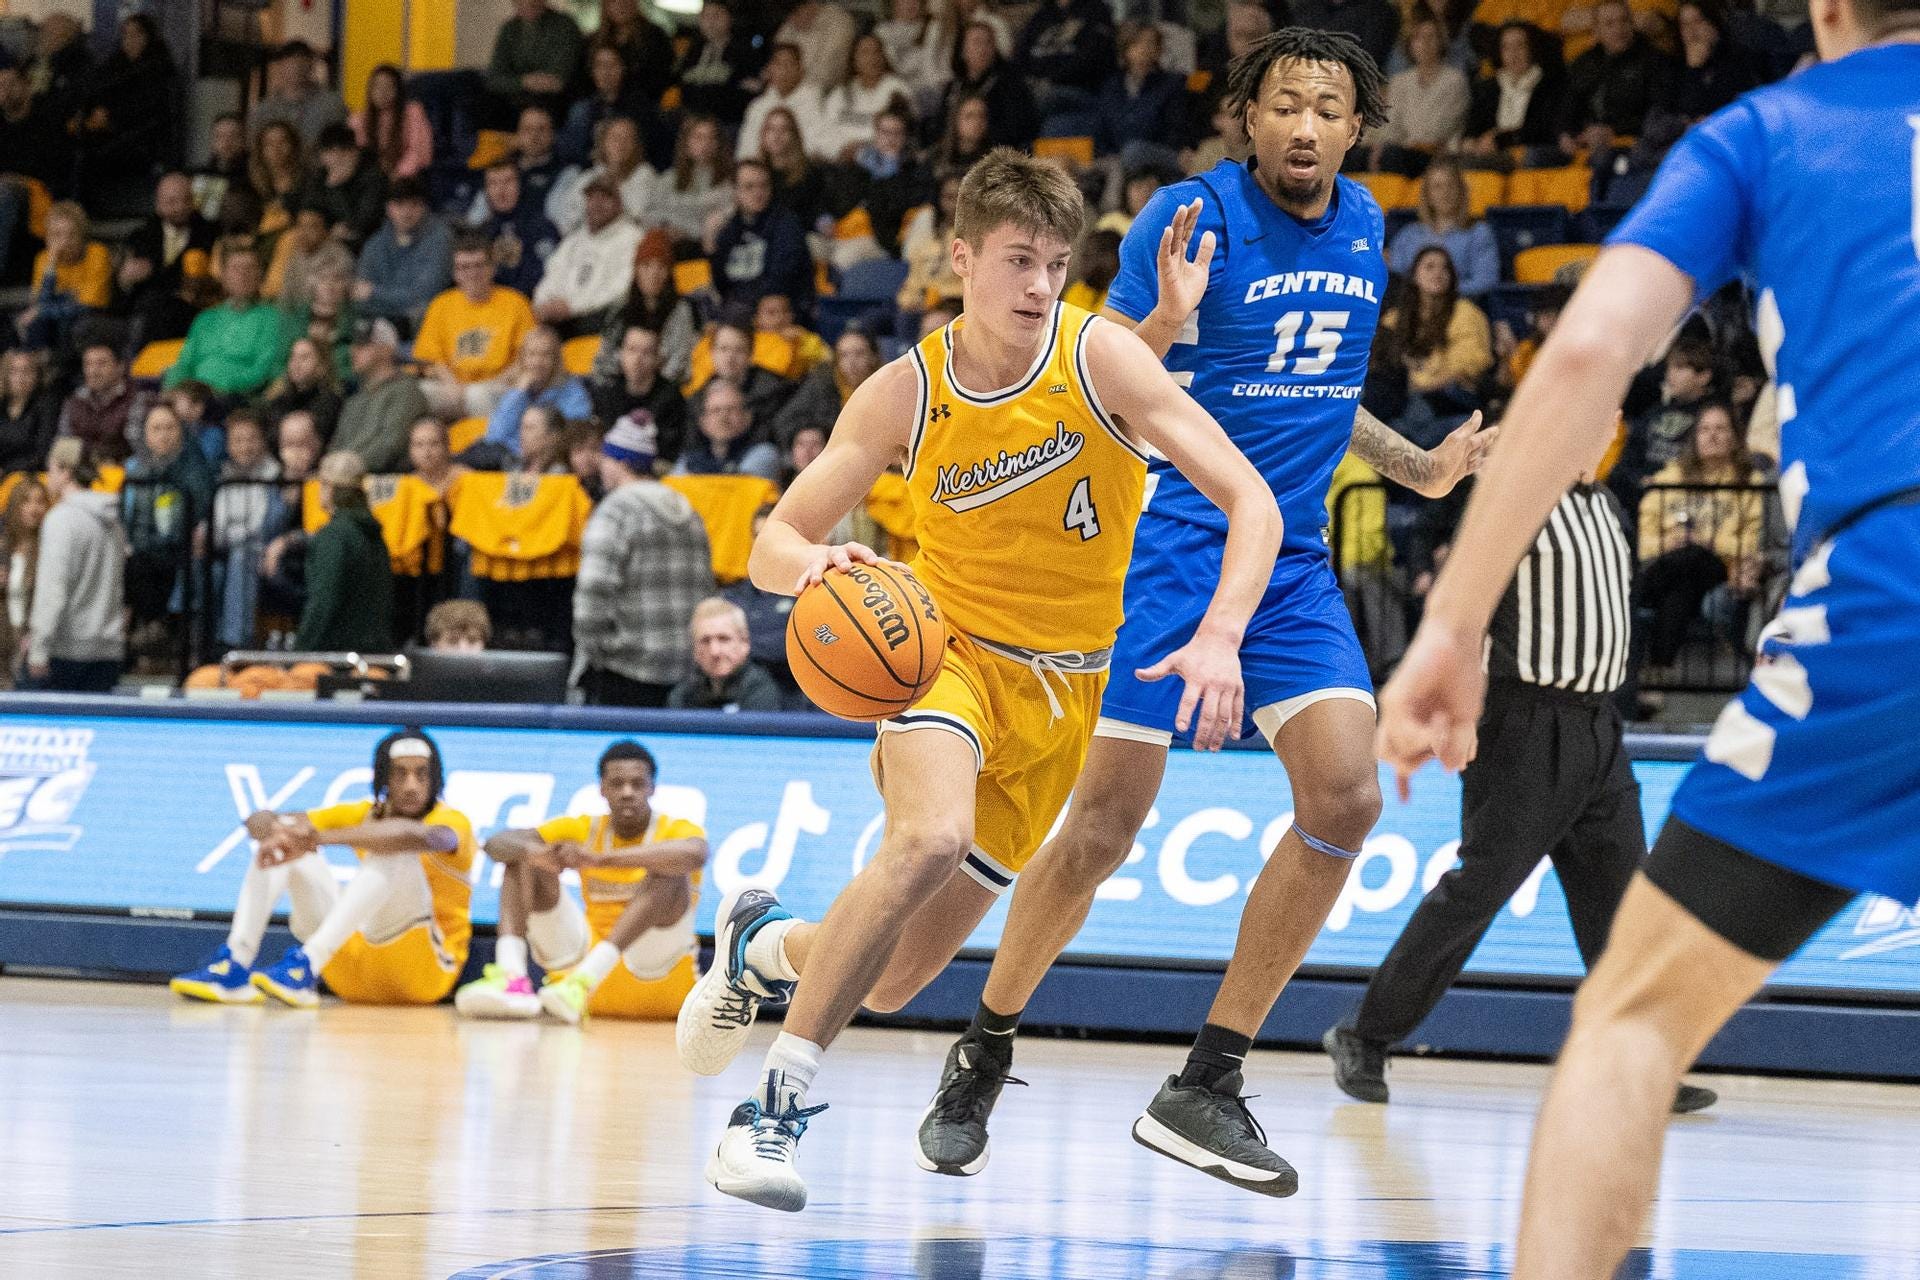 O'Connell's block secures Merrimack's win over Central Connecticut and a share of first place